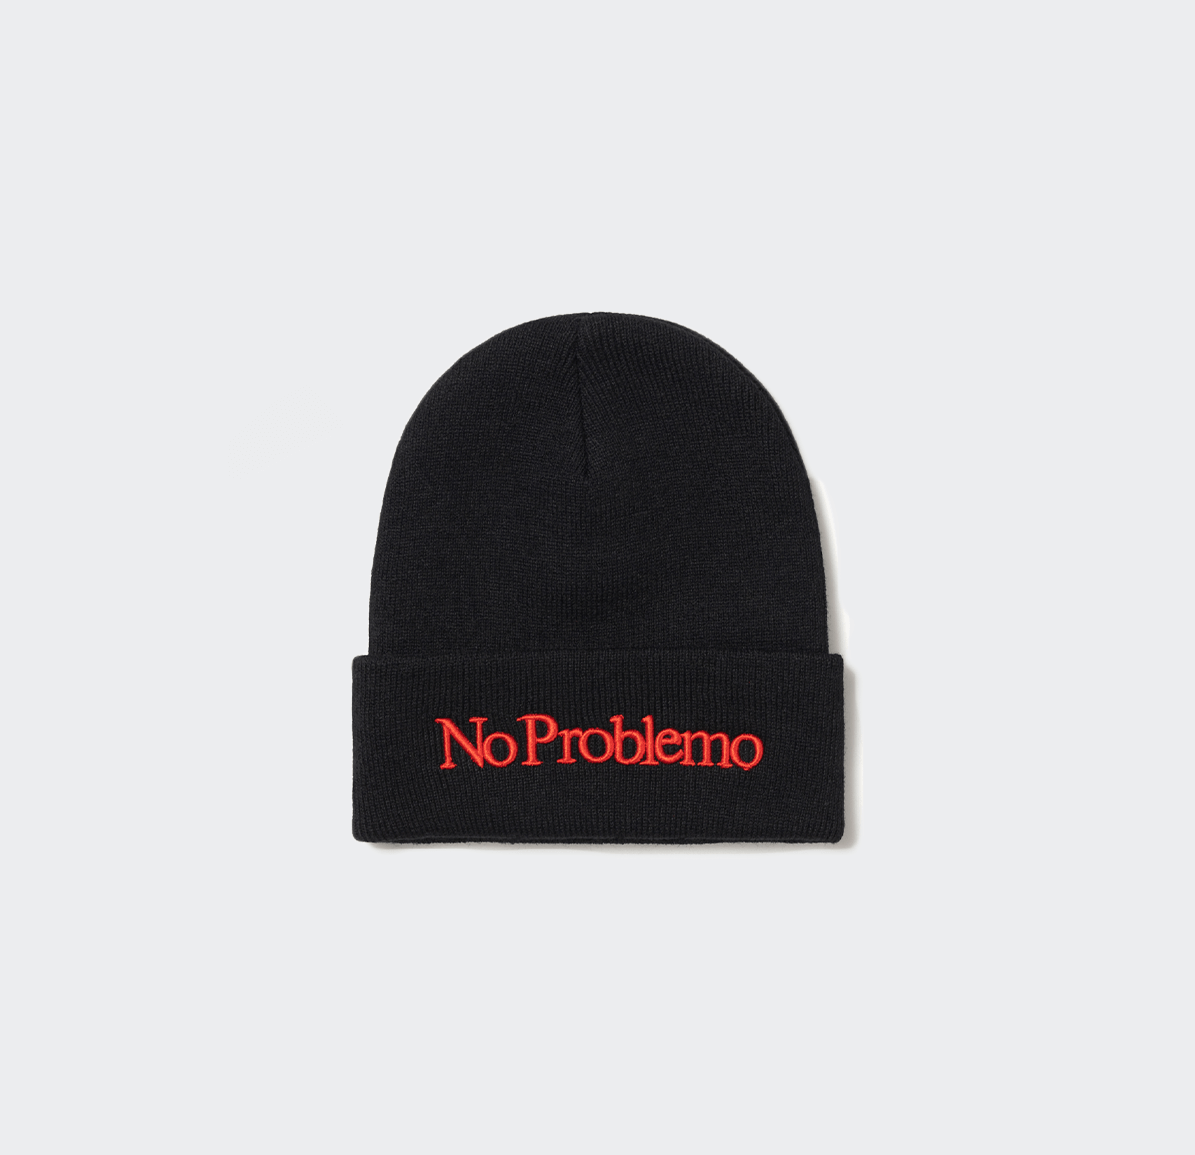 Aries Embroidered Mini No Problemo Beanie - Black - Aries - State Of Play